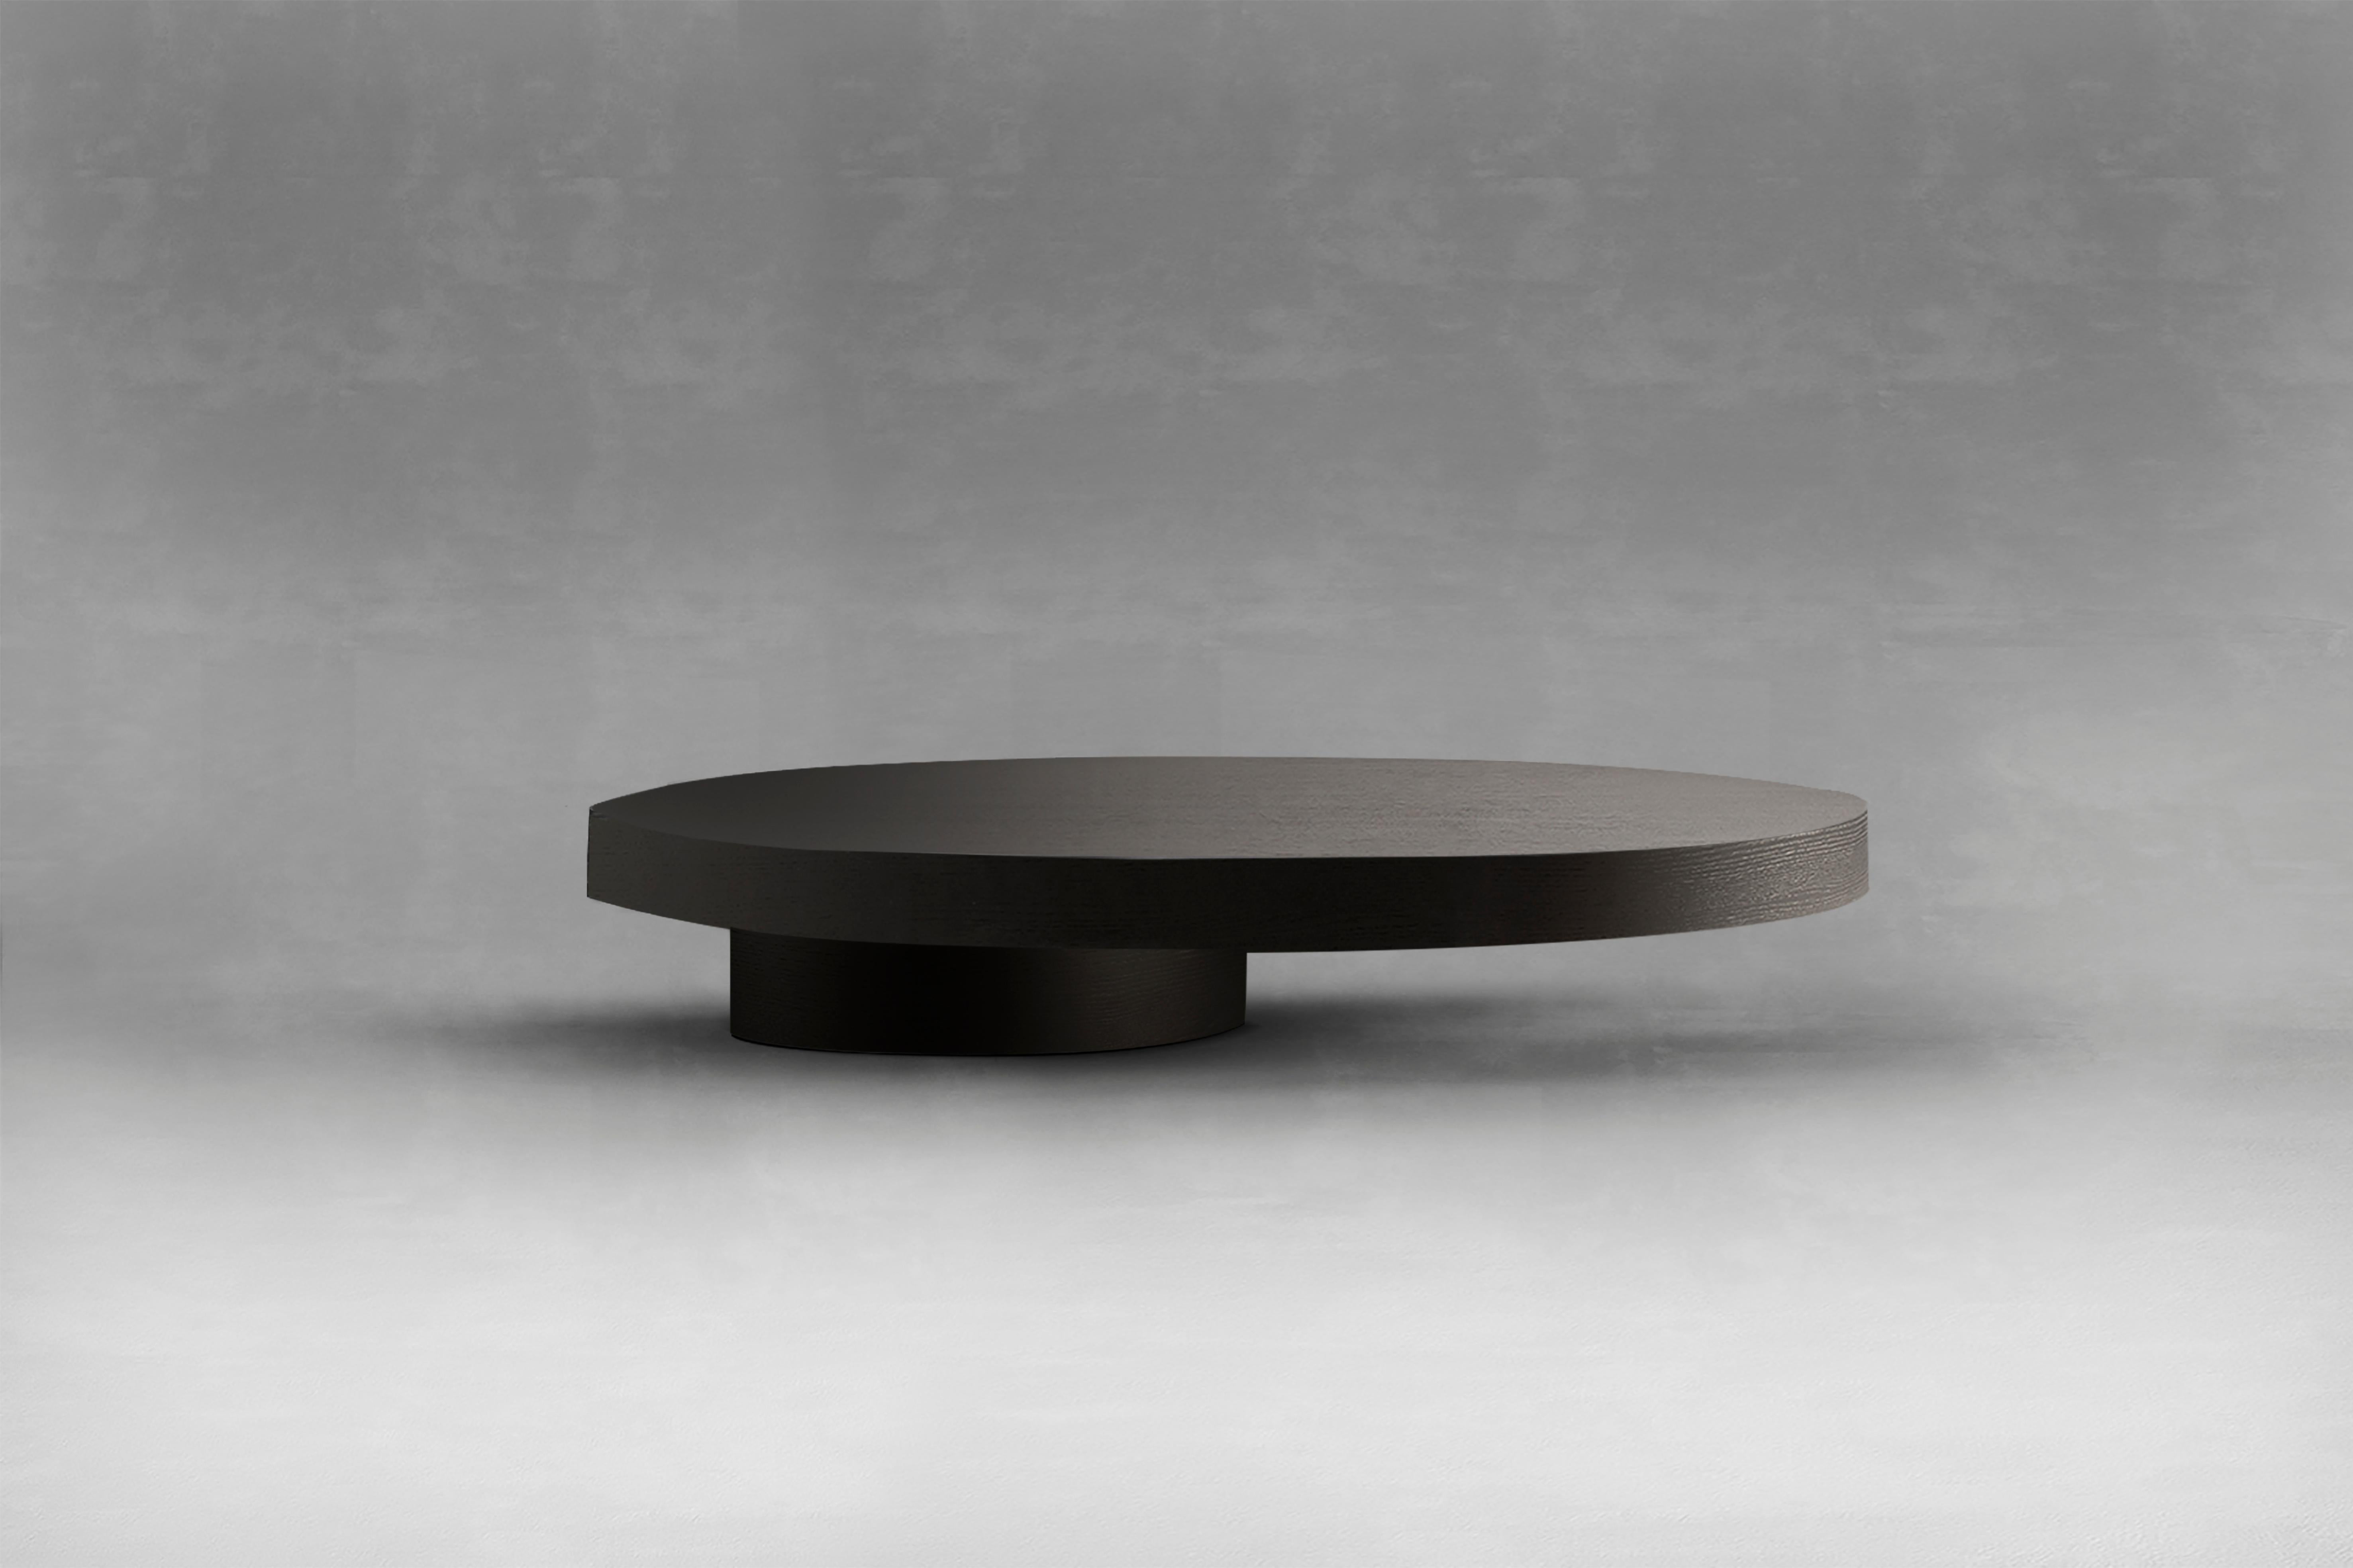 Bassa Center Table in Black Oak Wood by Collector Studio

It's like having a huge block of oak wood. This black oak table will not only look beautifull but will also feel incredible as it is finished with a smooth finish that will cast amazing